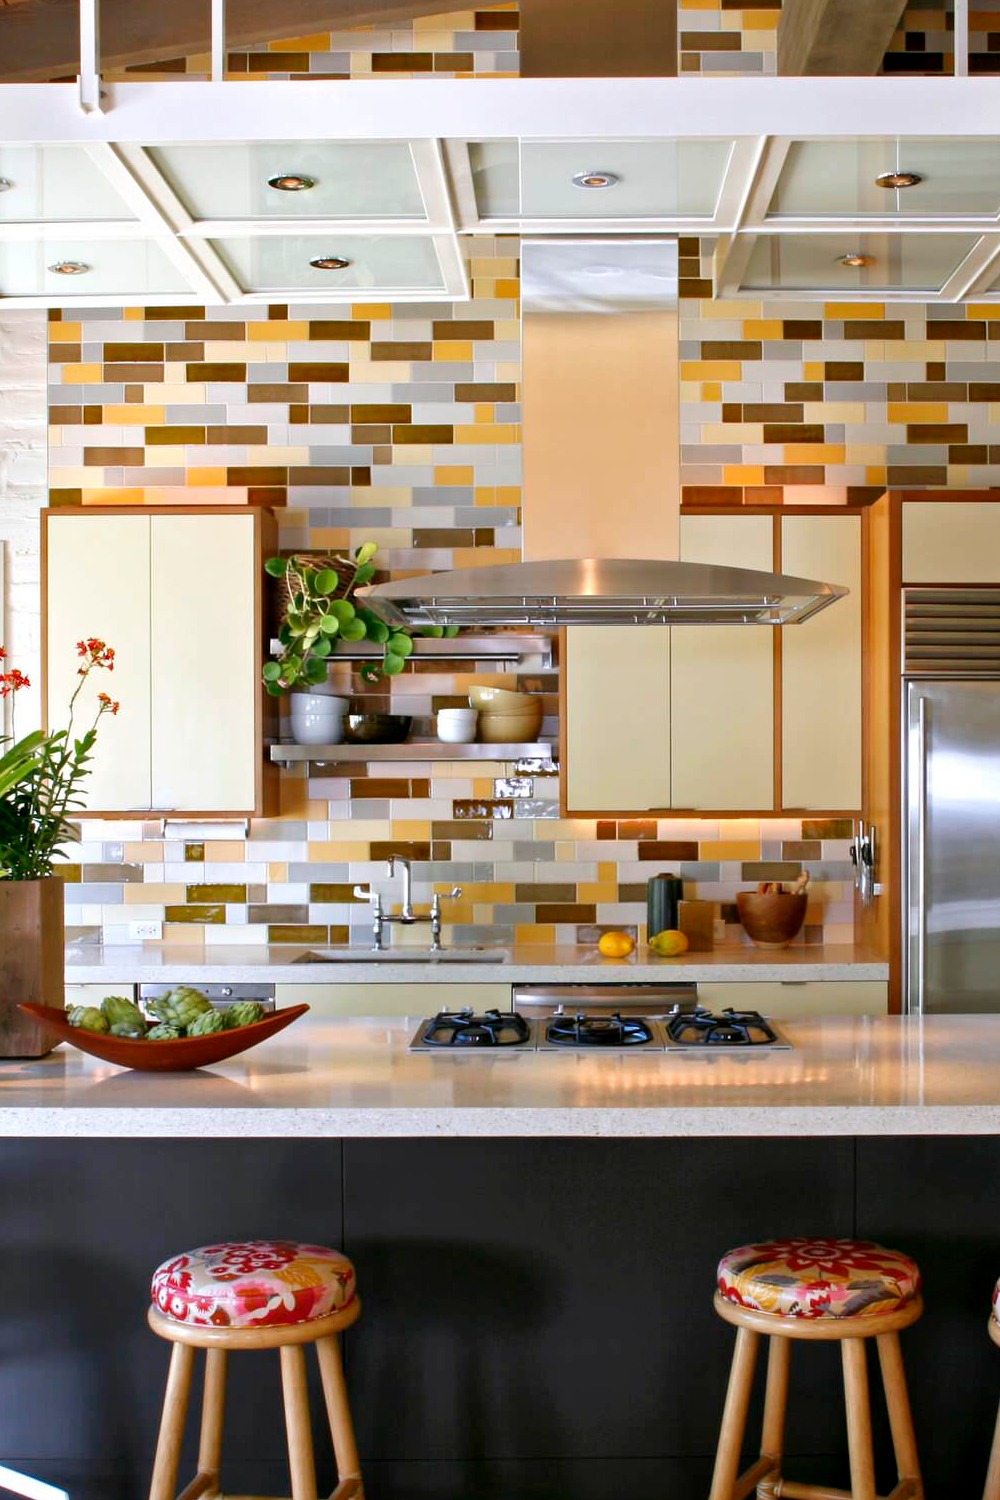 Multicolored Ceramic Tiles Terrazo Counters Beige Cabinetry Porcelain Flooring